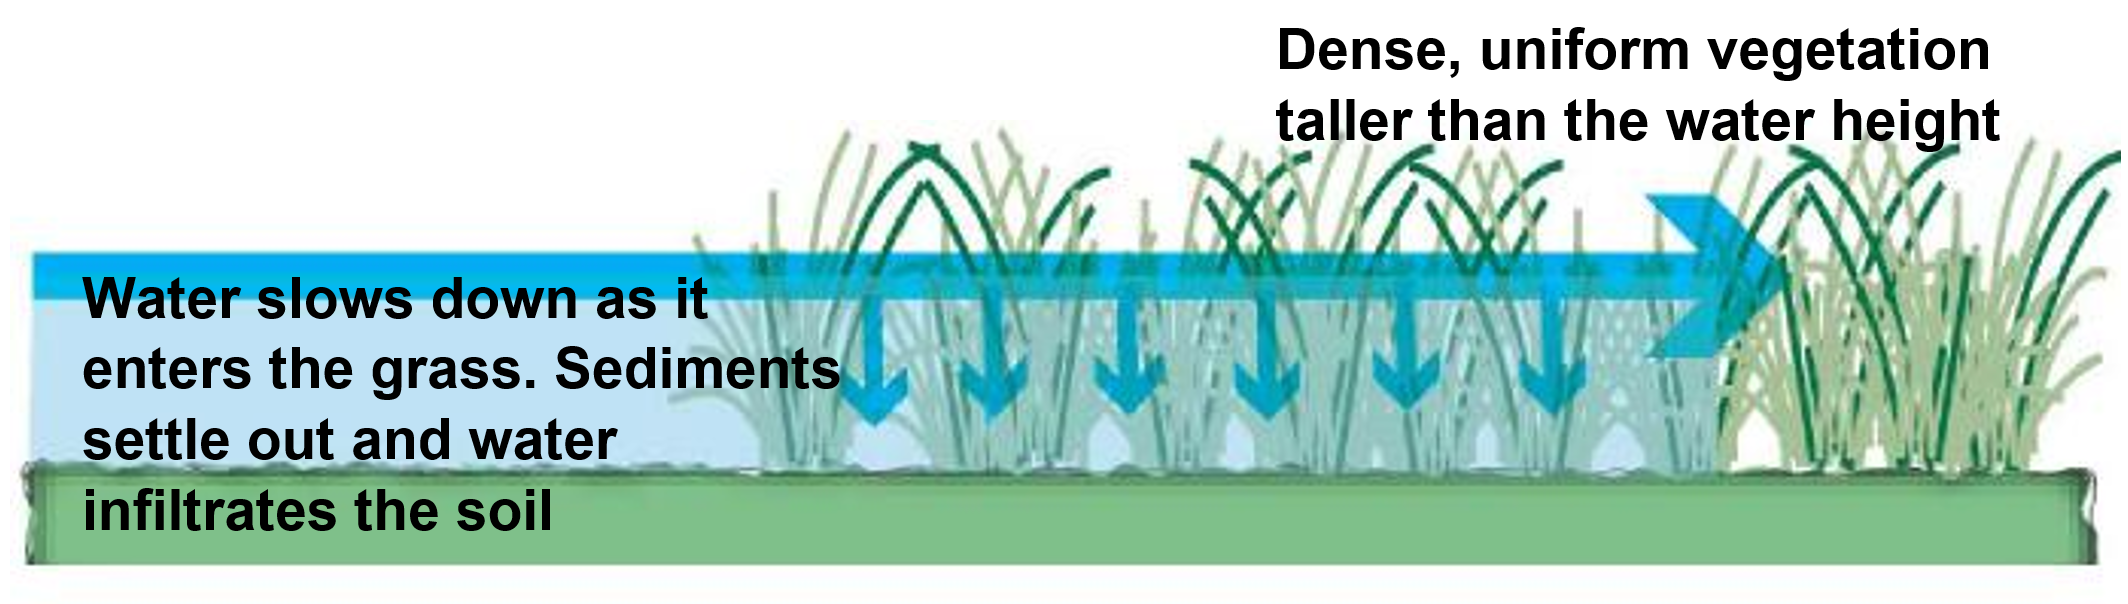 Figure 3 Illustration showing water passing through a grass buffer, highlighting how dense vegetation can slow water and facilitate sediment deposition. Image by E2DesignLab (2014)